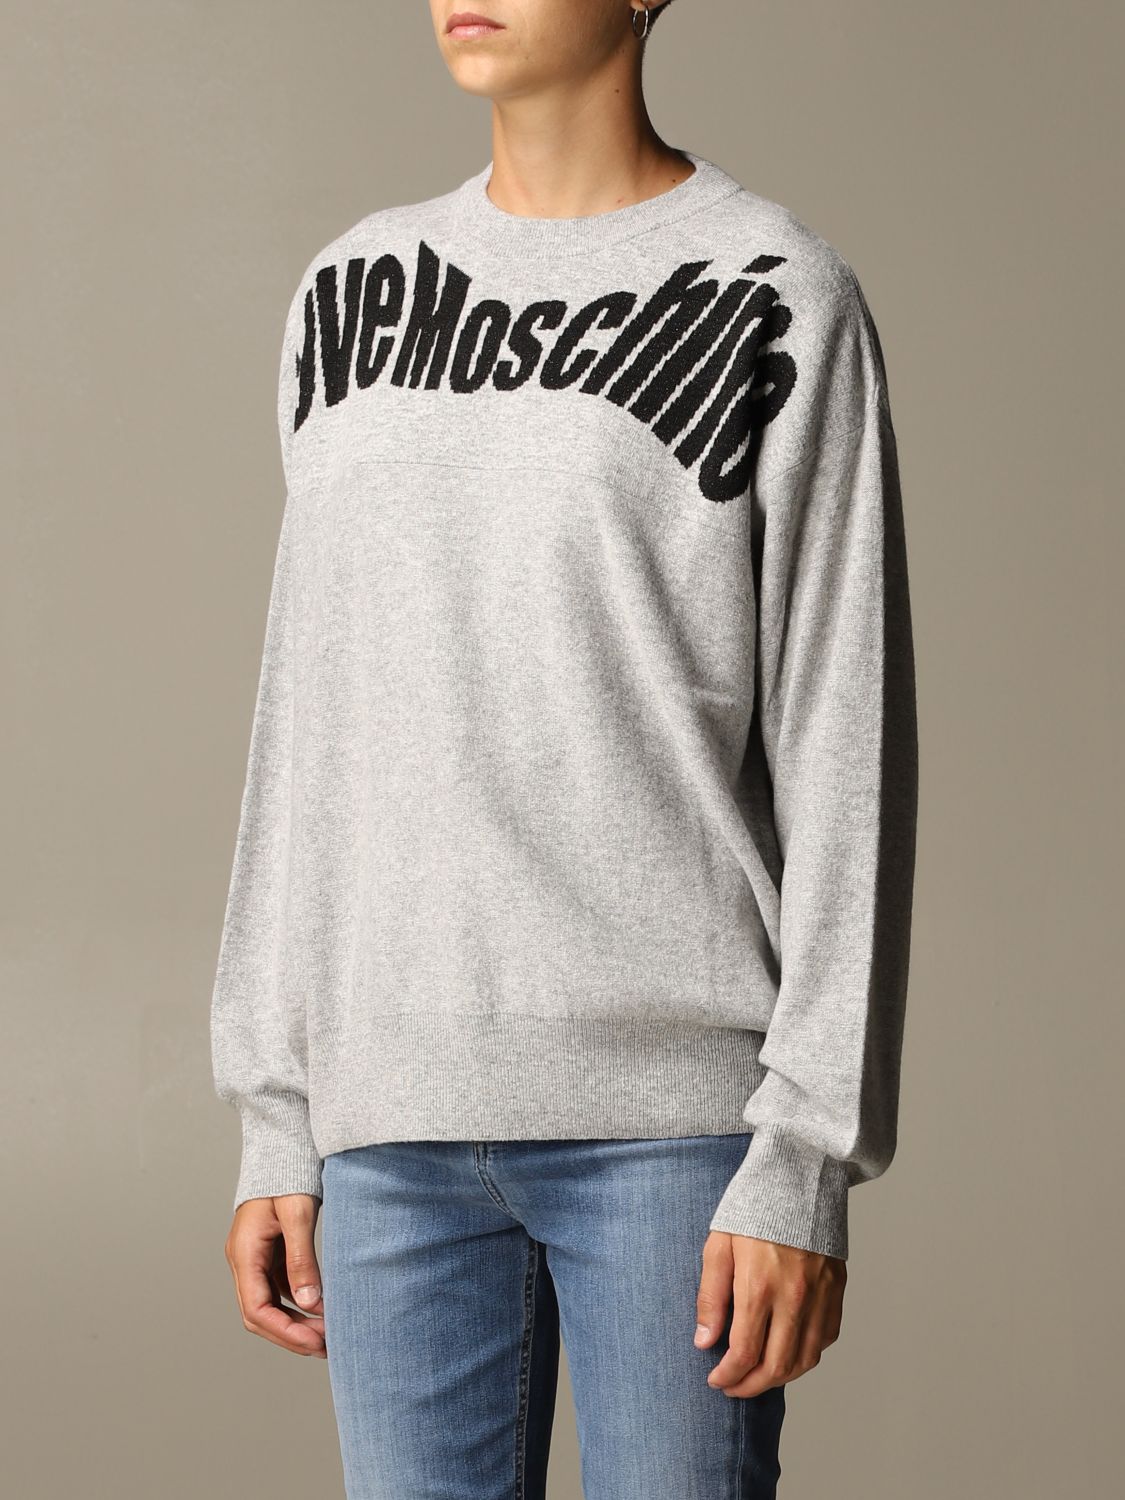 Love Moschino Outlet: jumper for women - Grey | Love Moschino jumper ...